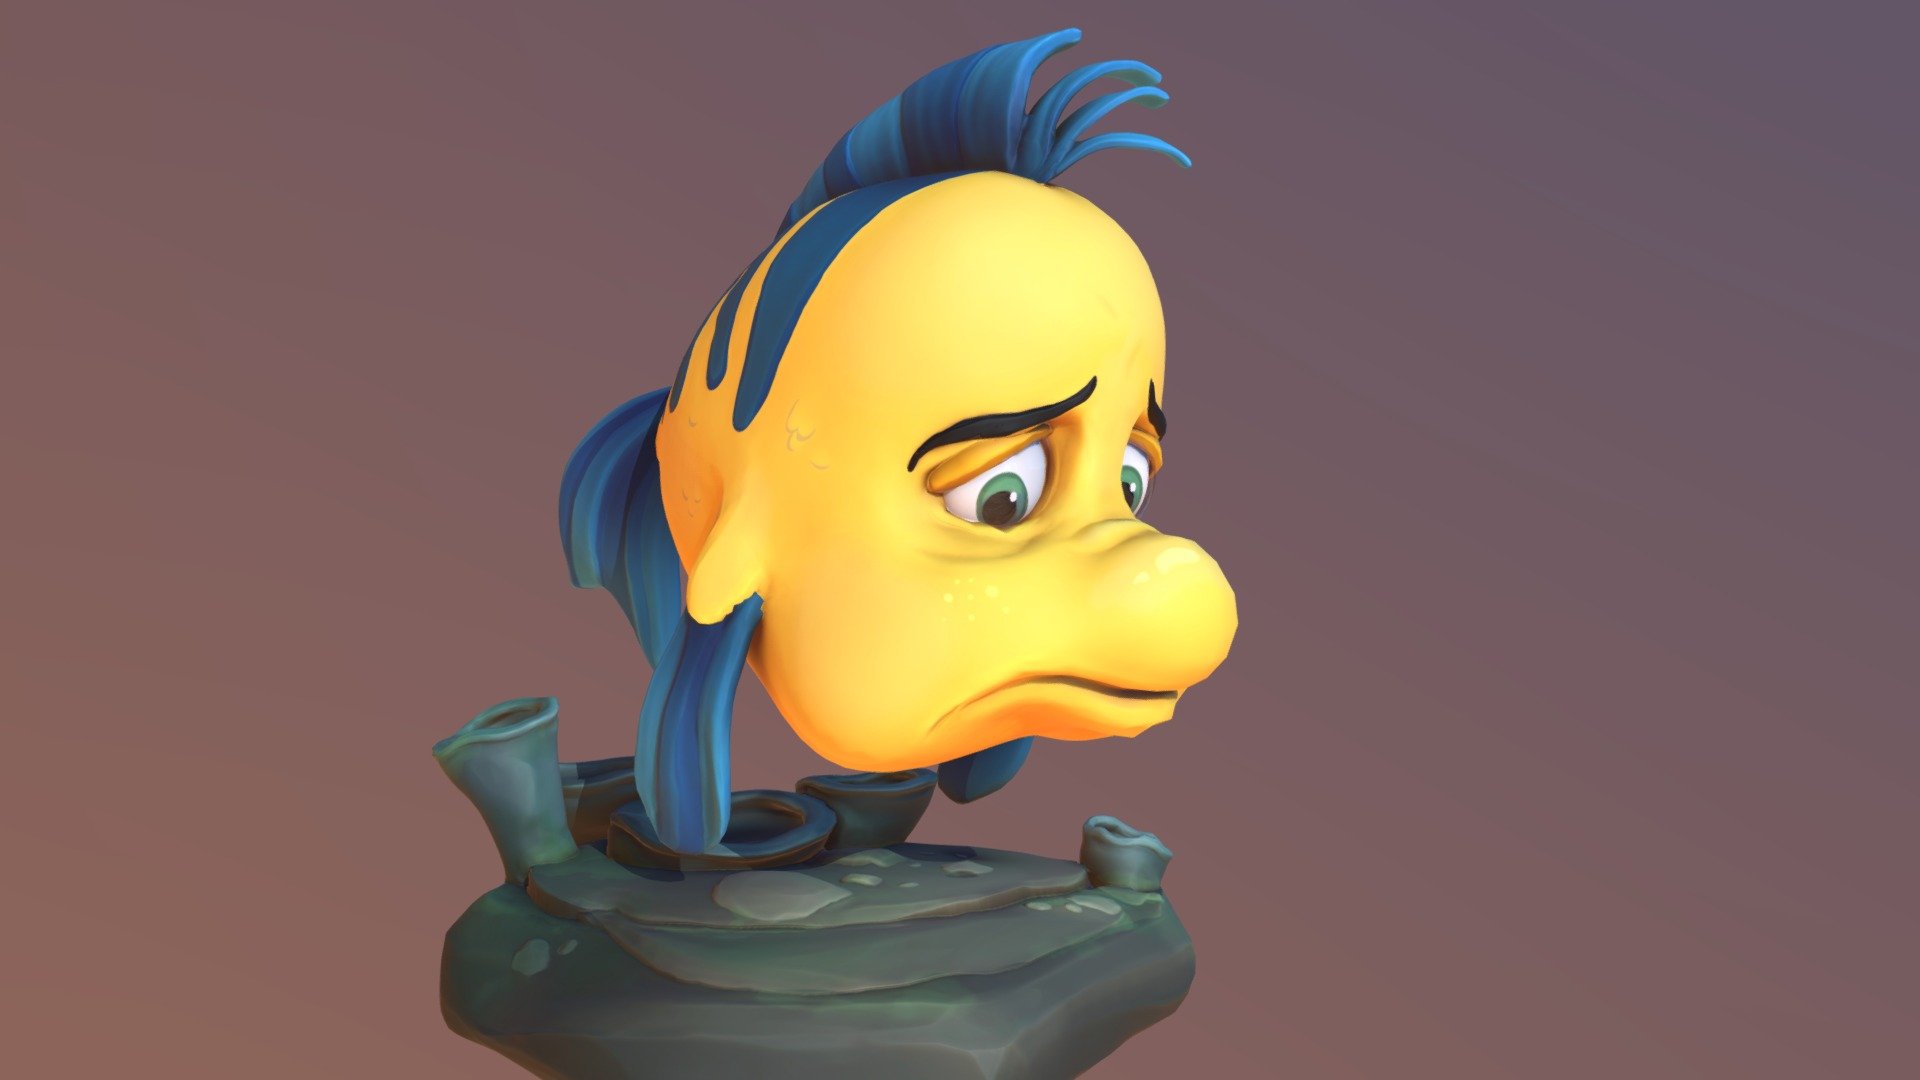  The Little Mermaid 2022 edition 3D  model  by zag girard 